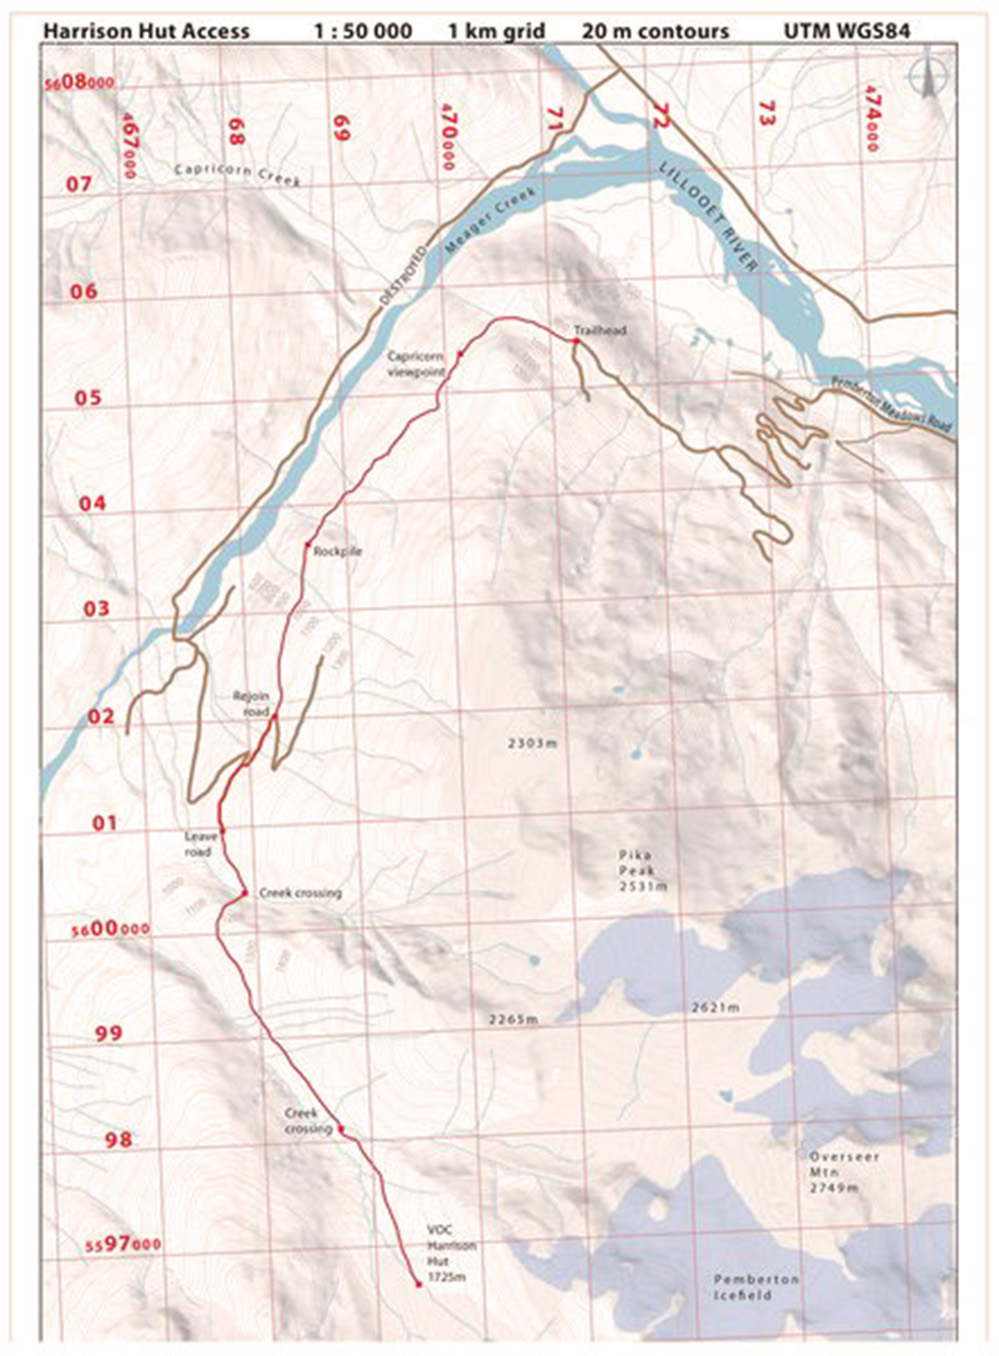 Grid map with the new trail route to the Harrison Hut marked in red.